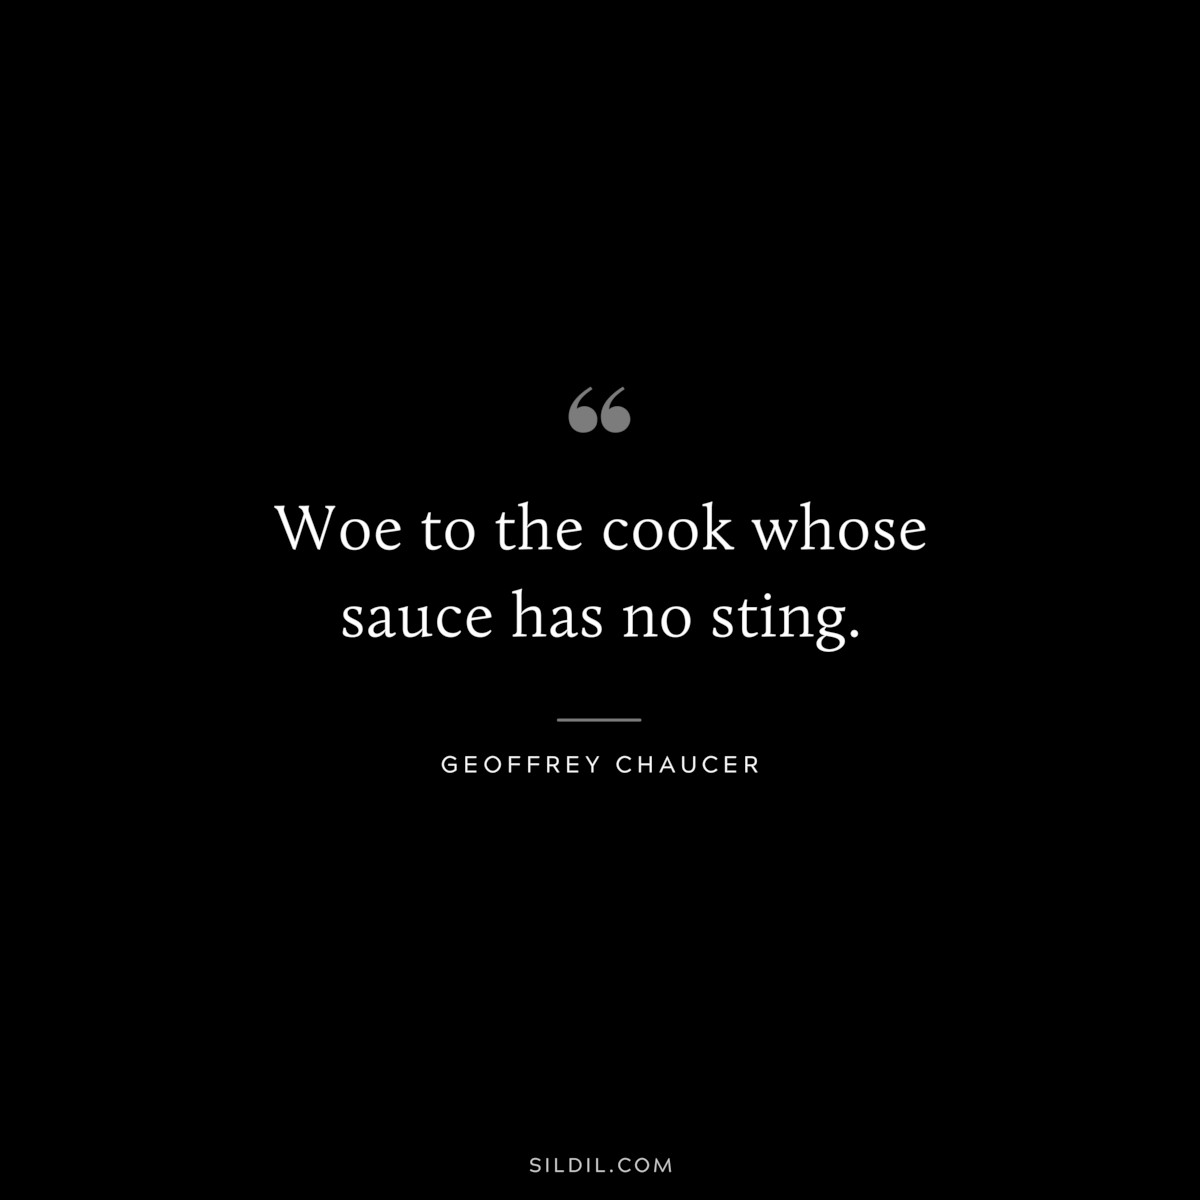 Woe to the cook whose sauce has no sting. ― Geoffrey Chaucer